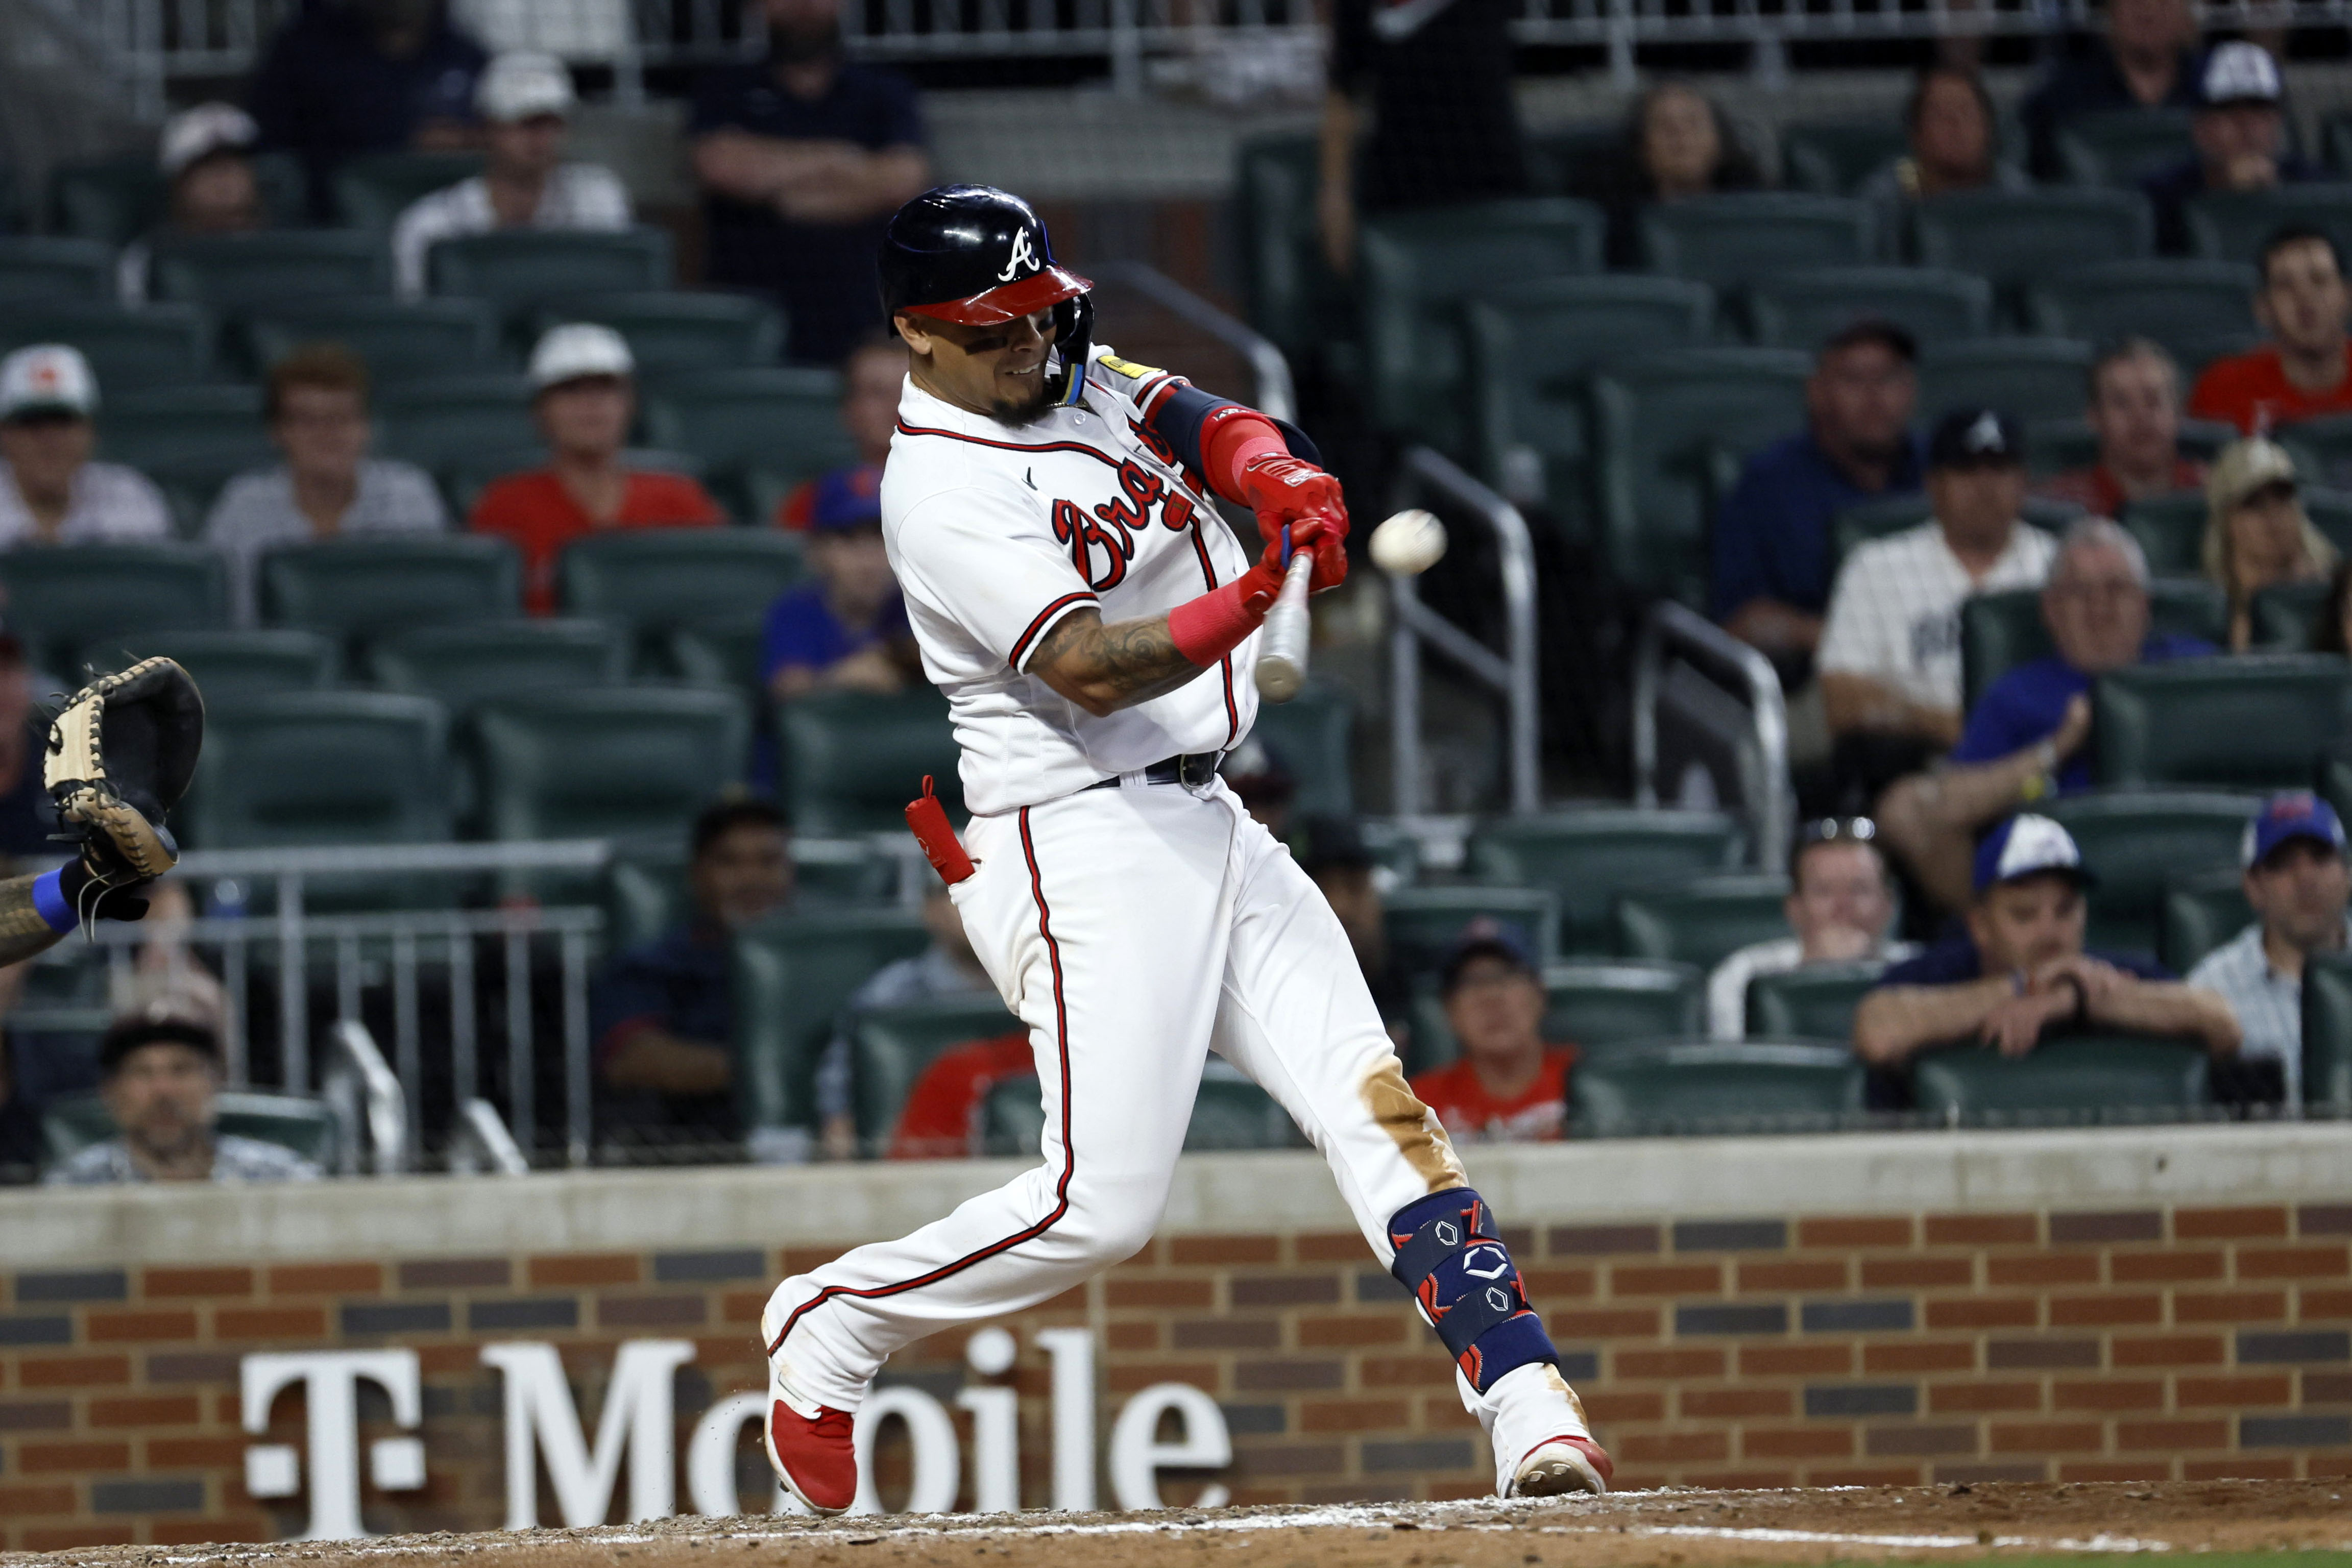 Ozzie Albies' walk-off HR ends sweep of Mets; Braves' AJ Smith